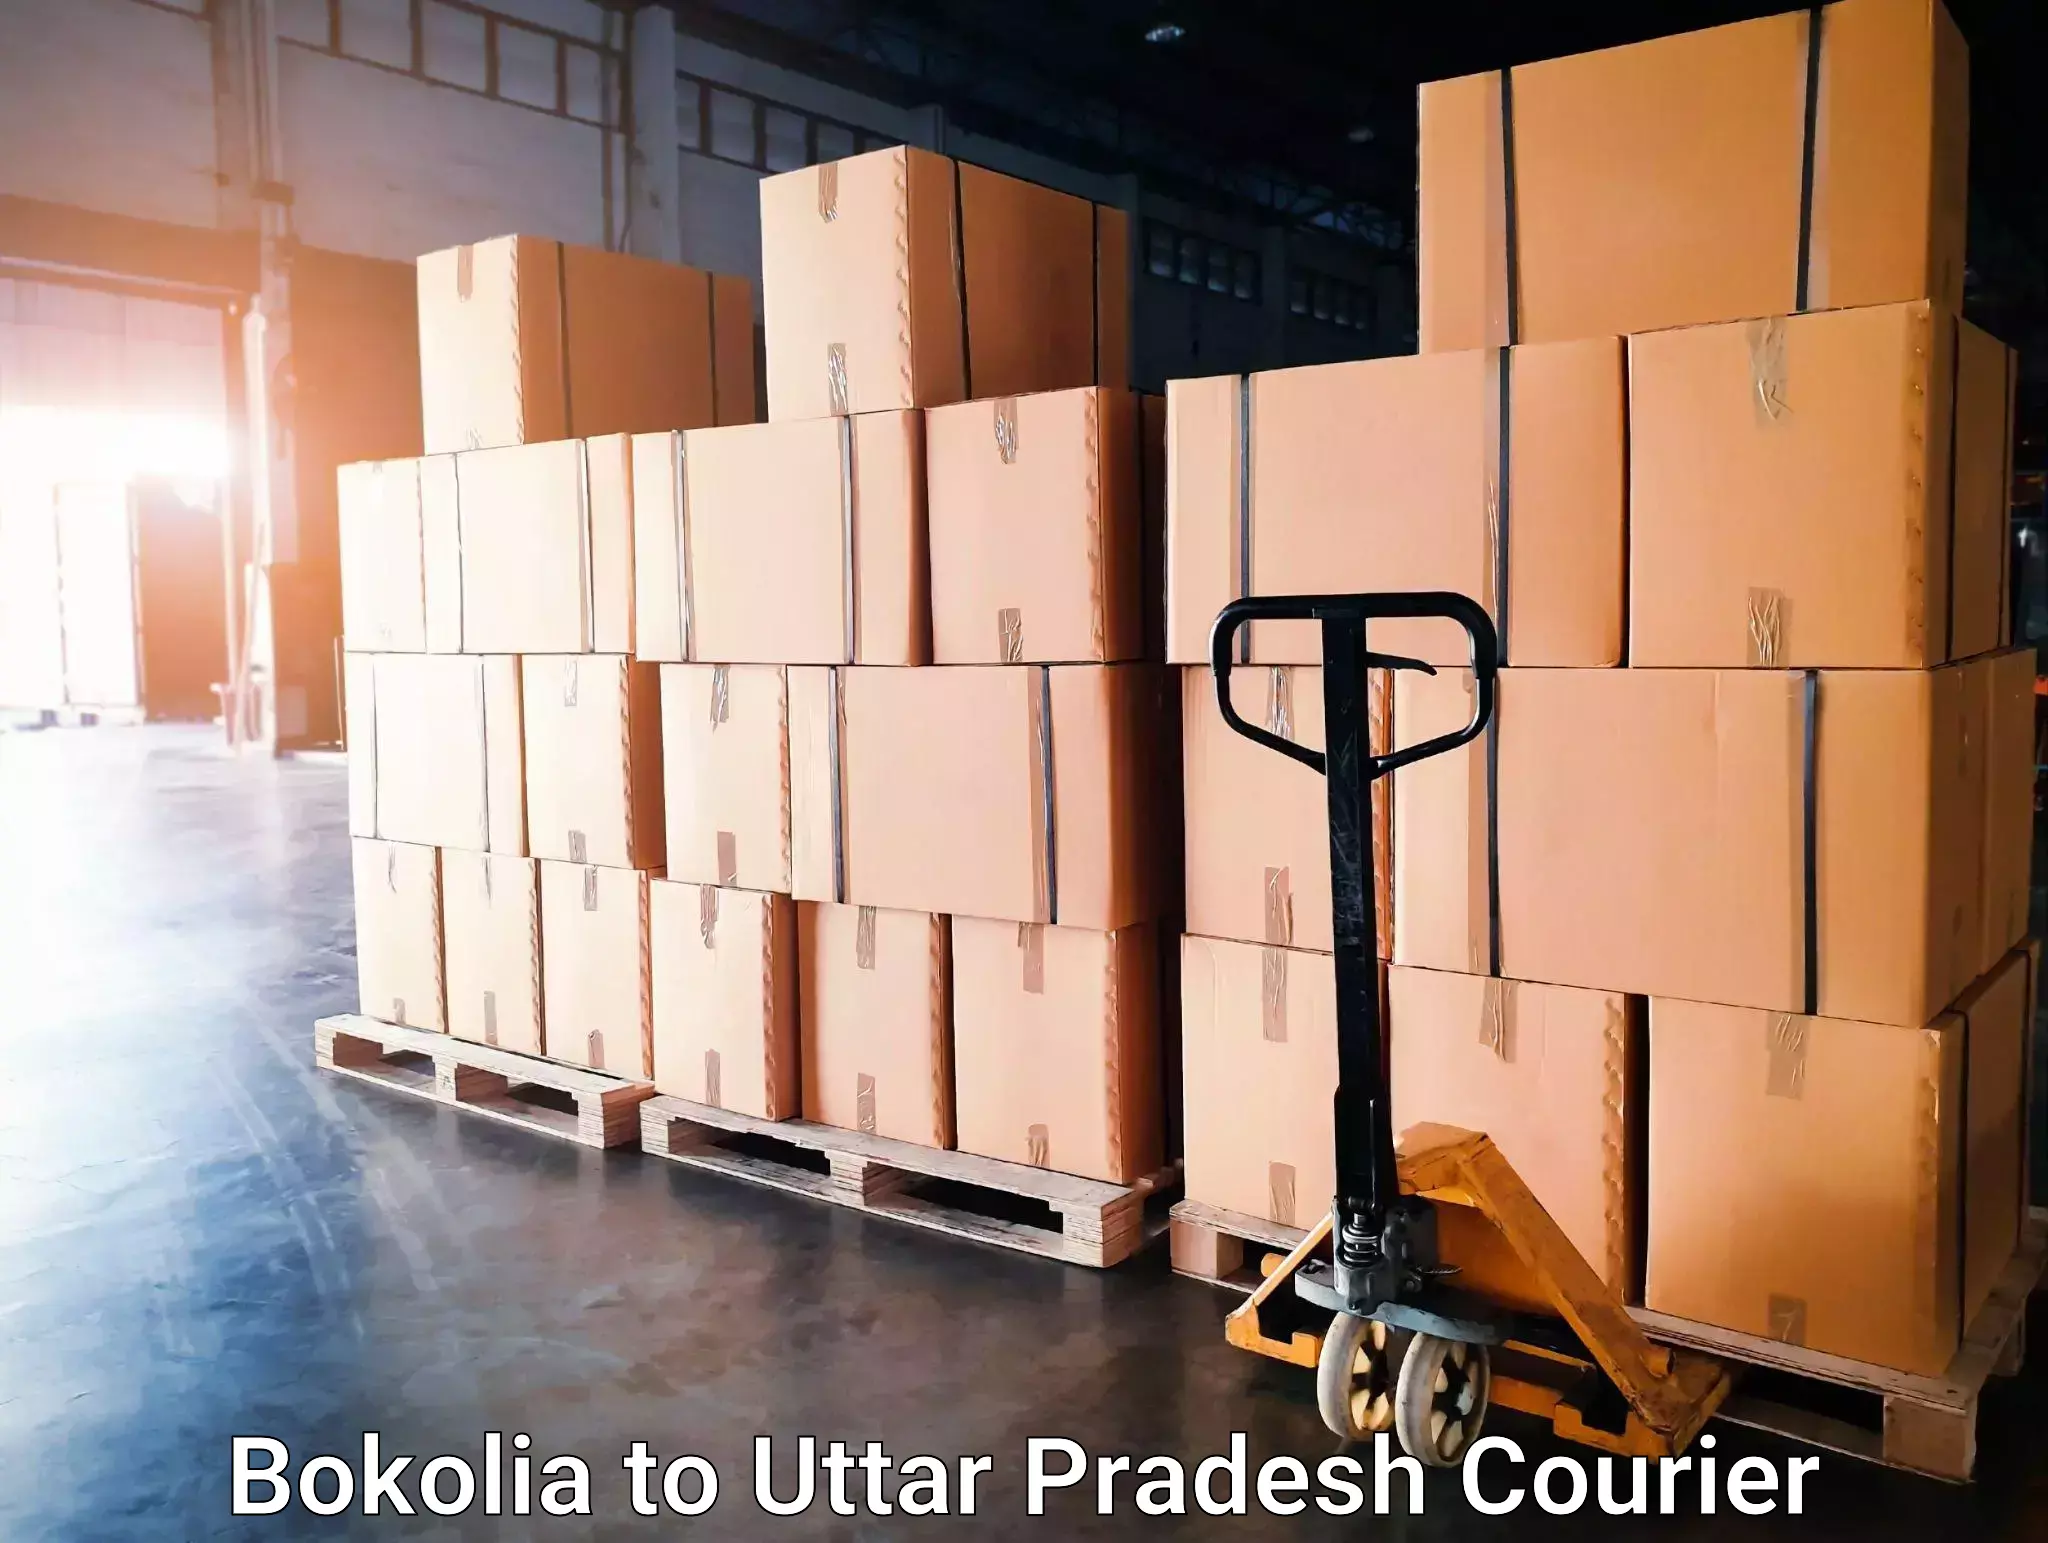 Doorstep delivery service in Bokolia to Baraut